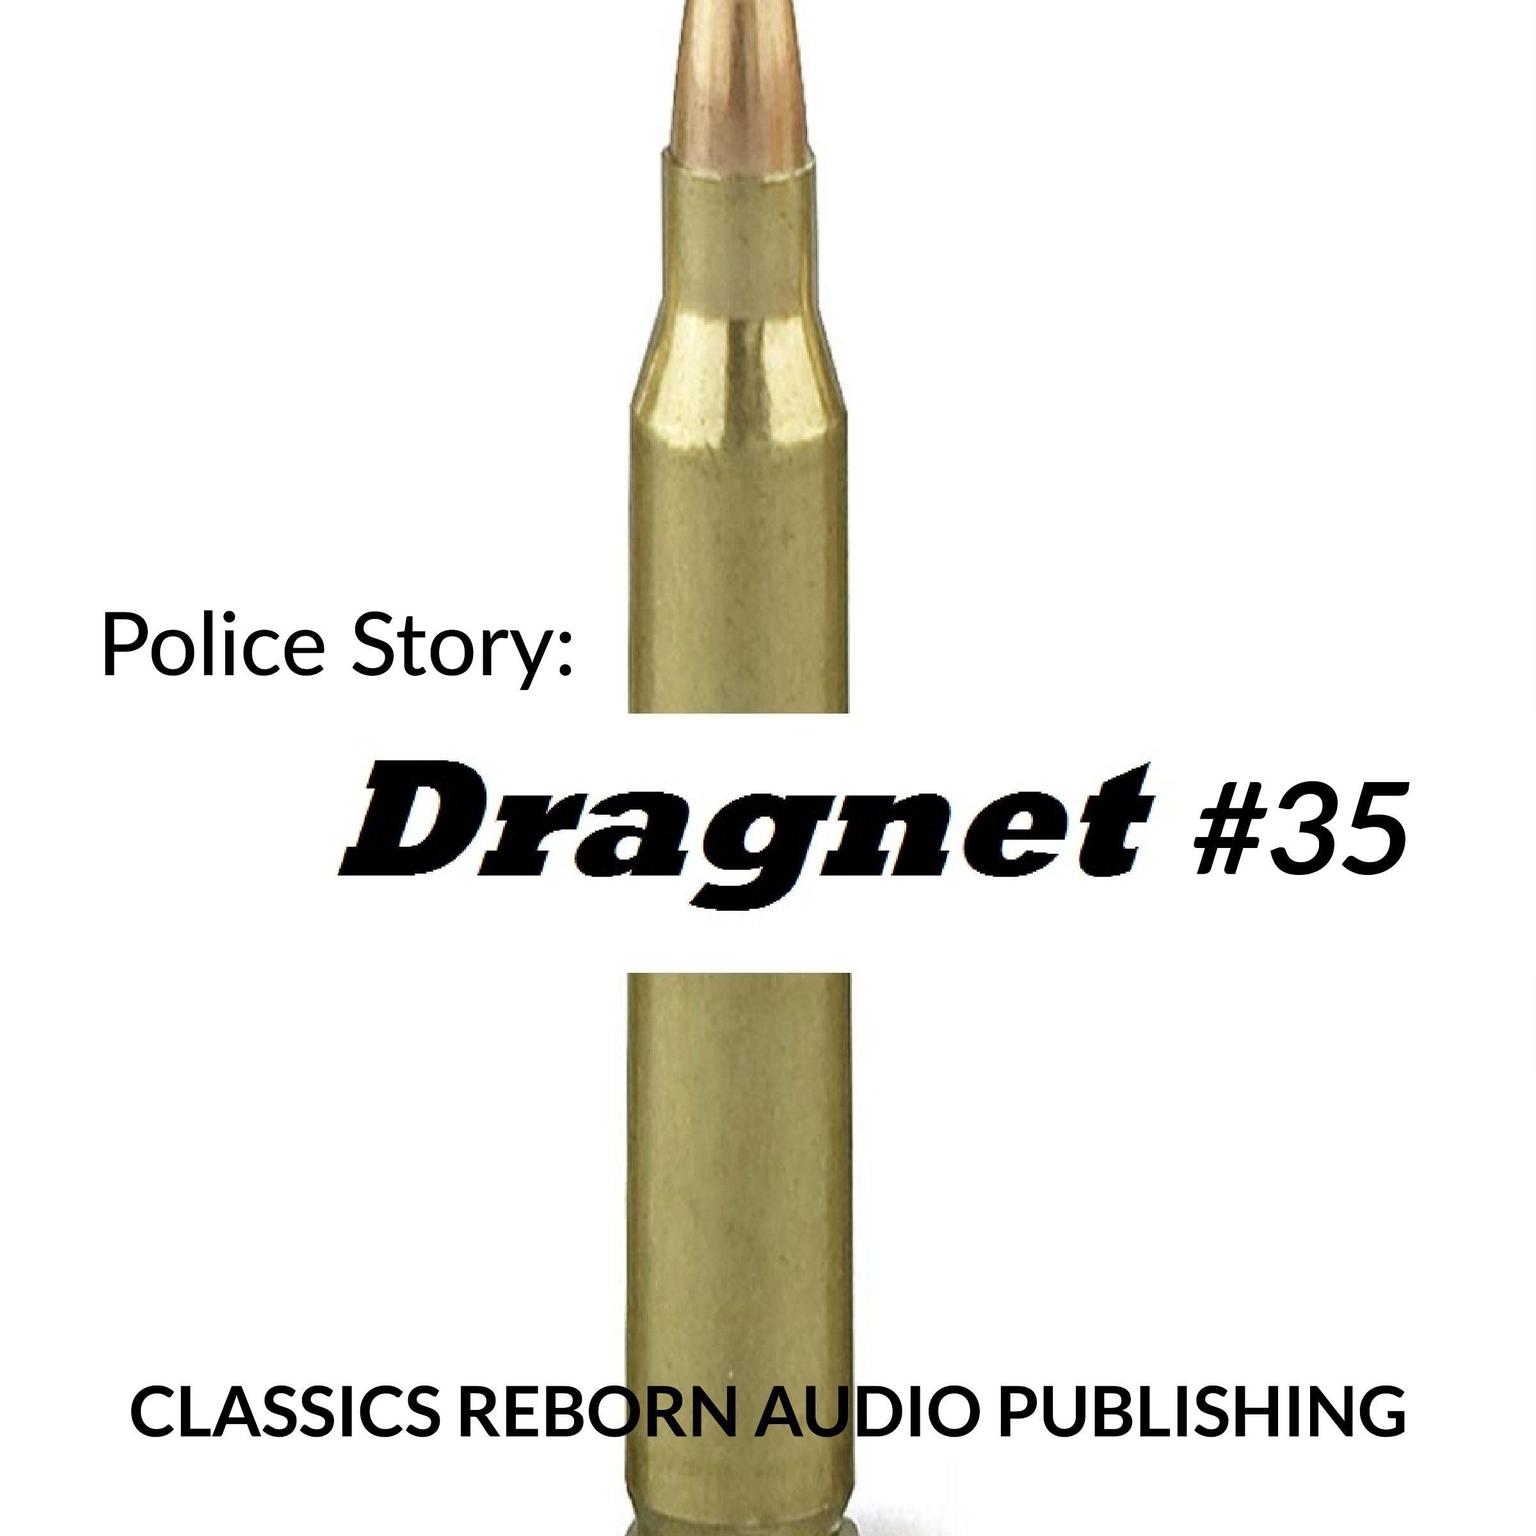 Police Story: Dragnet #35 Audiobook, by Classics Reborn Audio Publishing